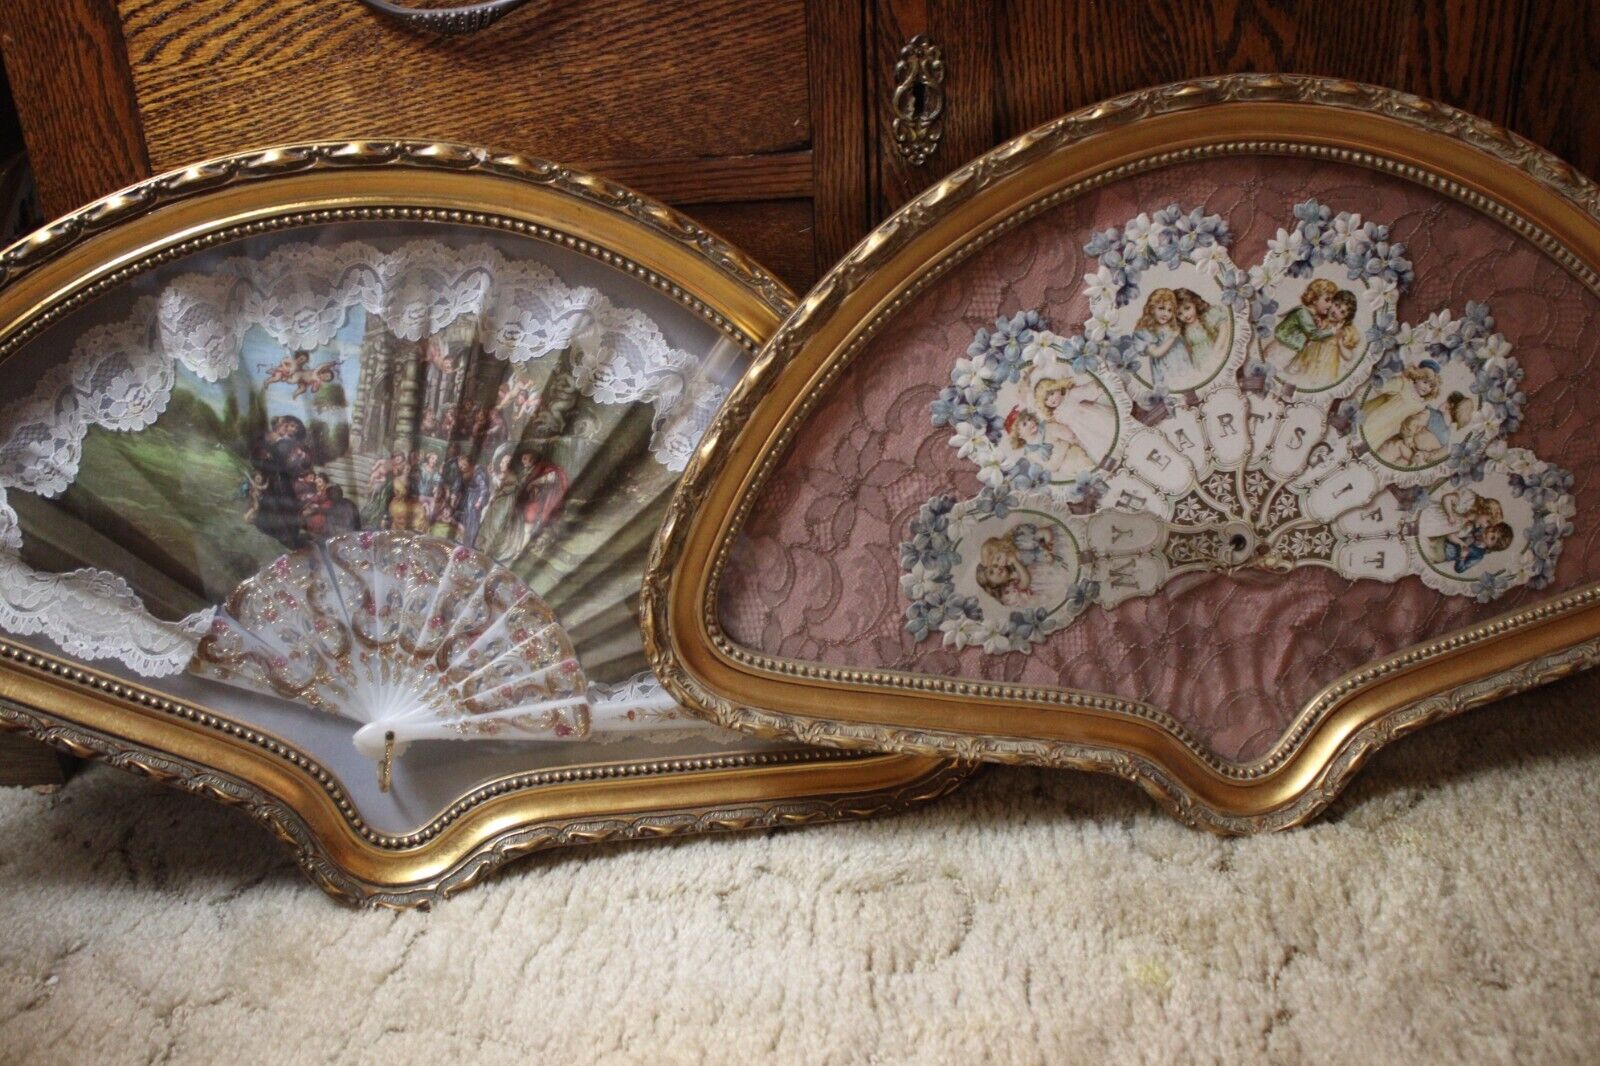 Gorgeous Pair of Victorian Fans in Golden Shadowbox Frames